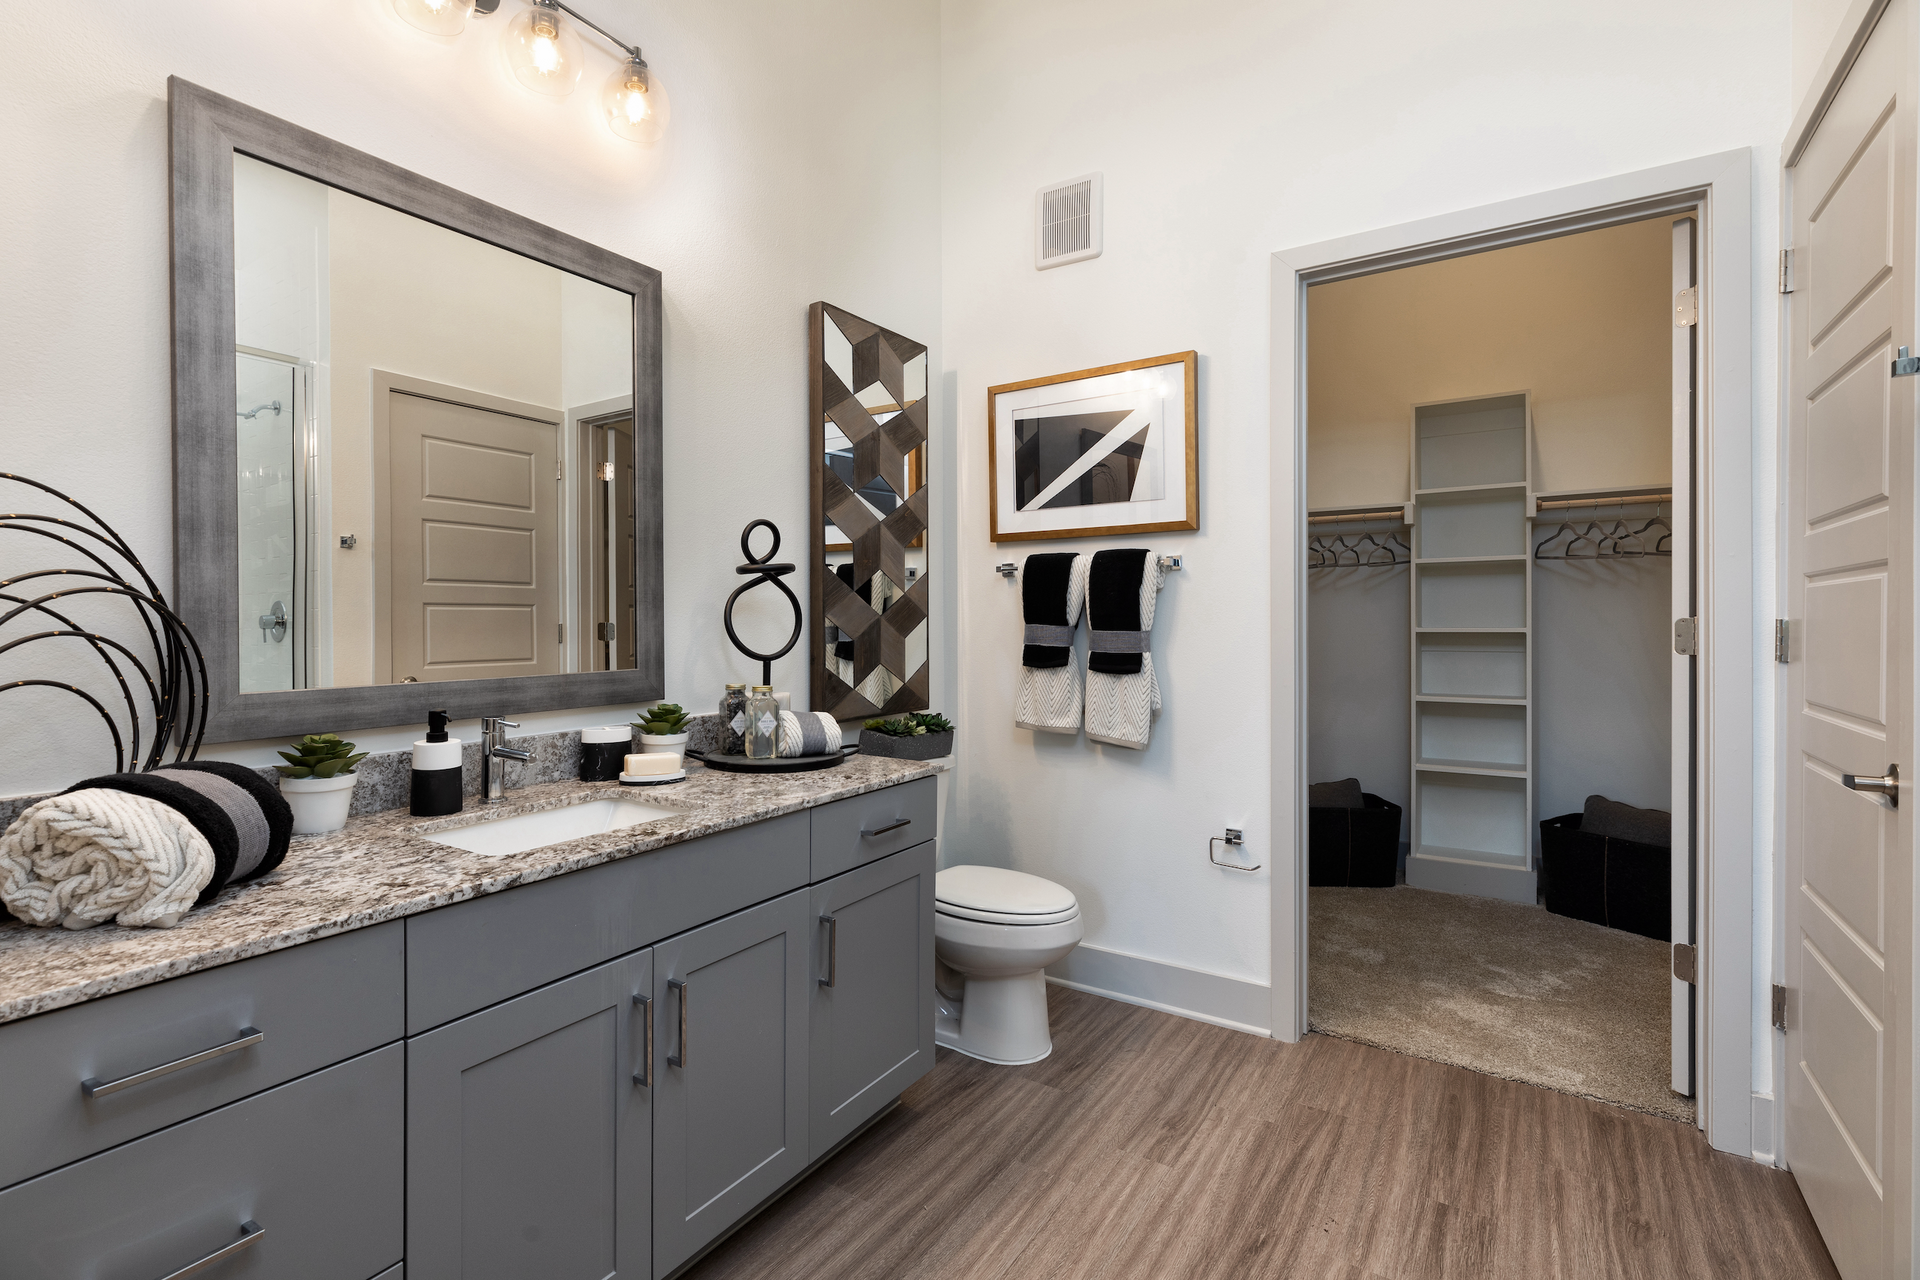 Spacious Bathroom with Walk In Closet | The ReVe